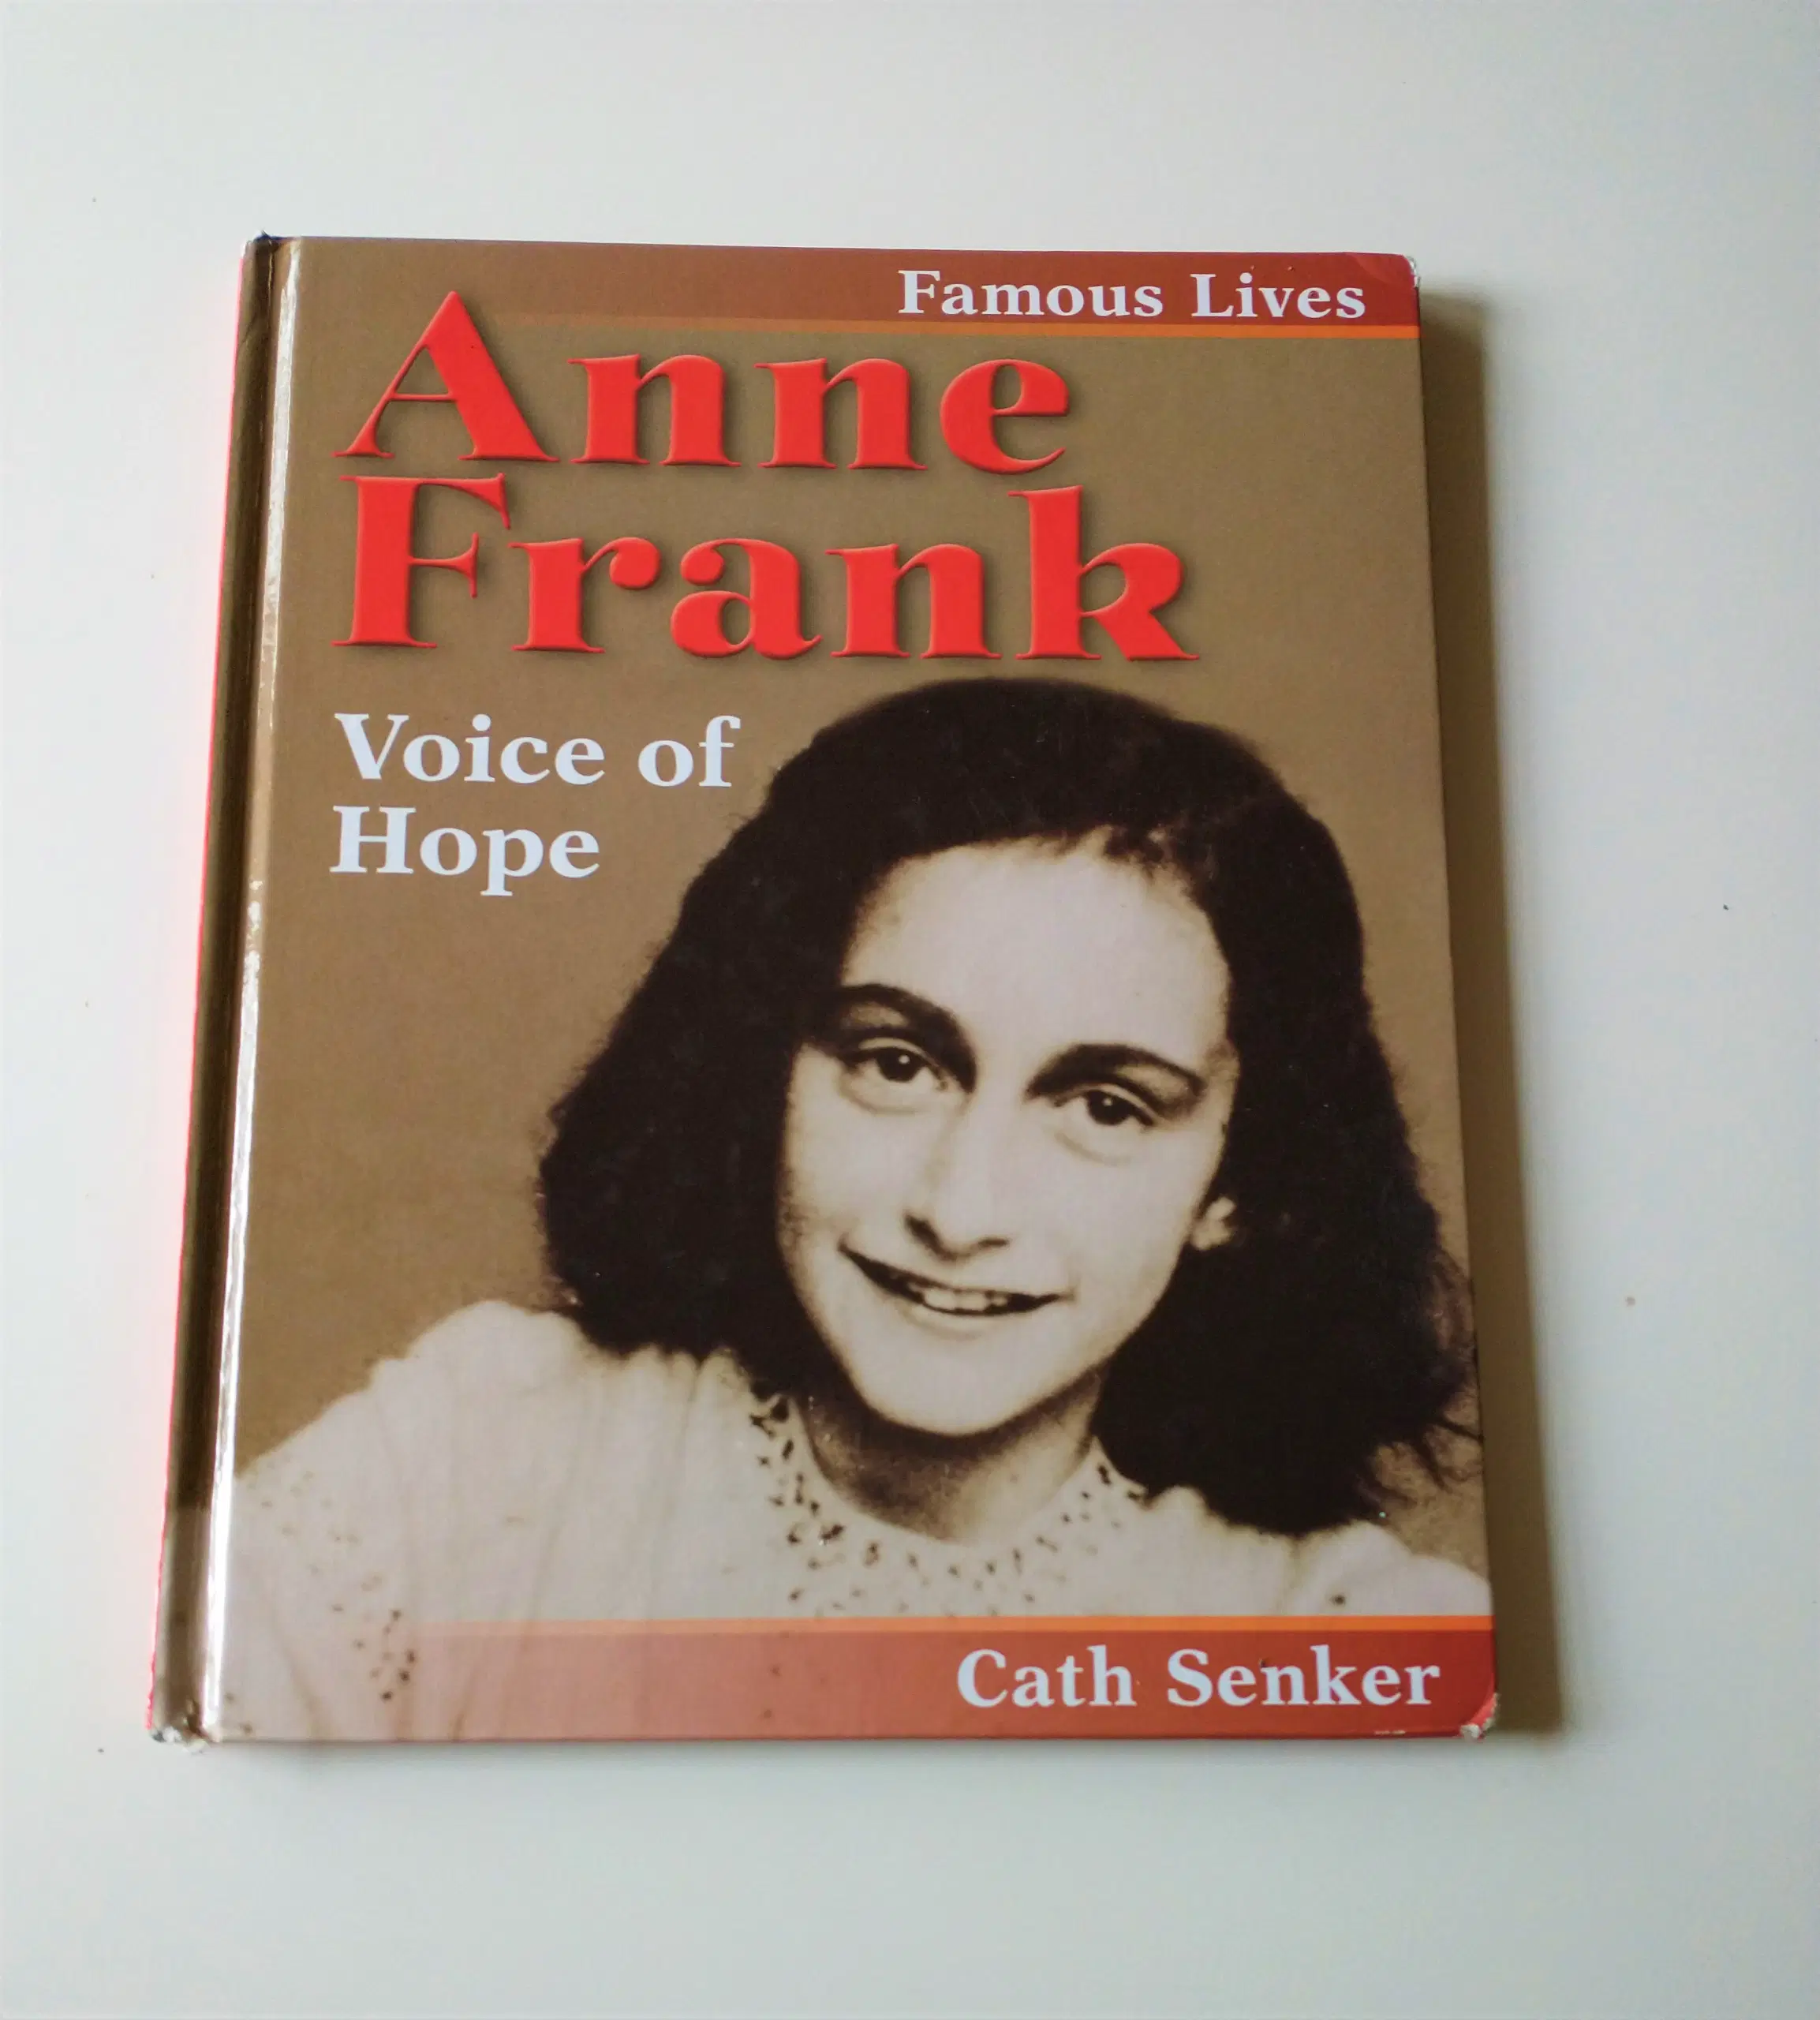 Anne Frank - Voice of Hope (Famous Lives)